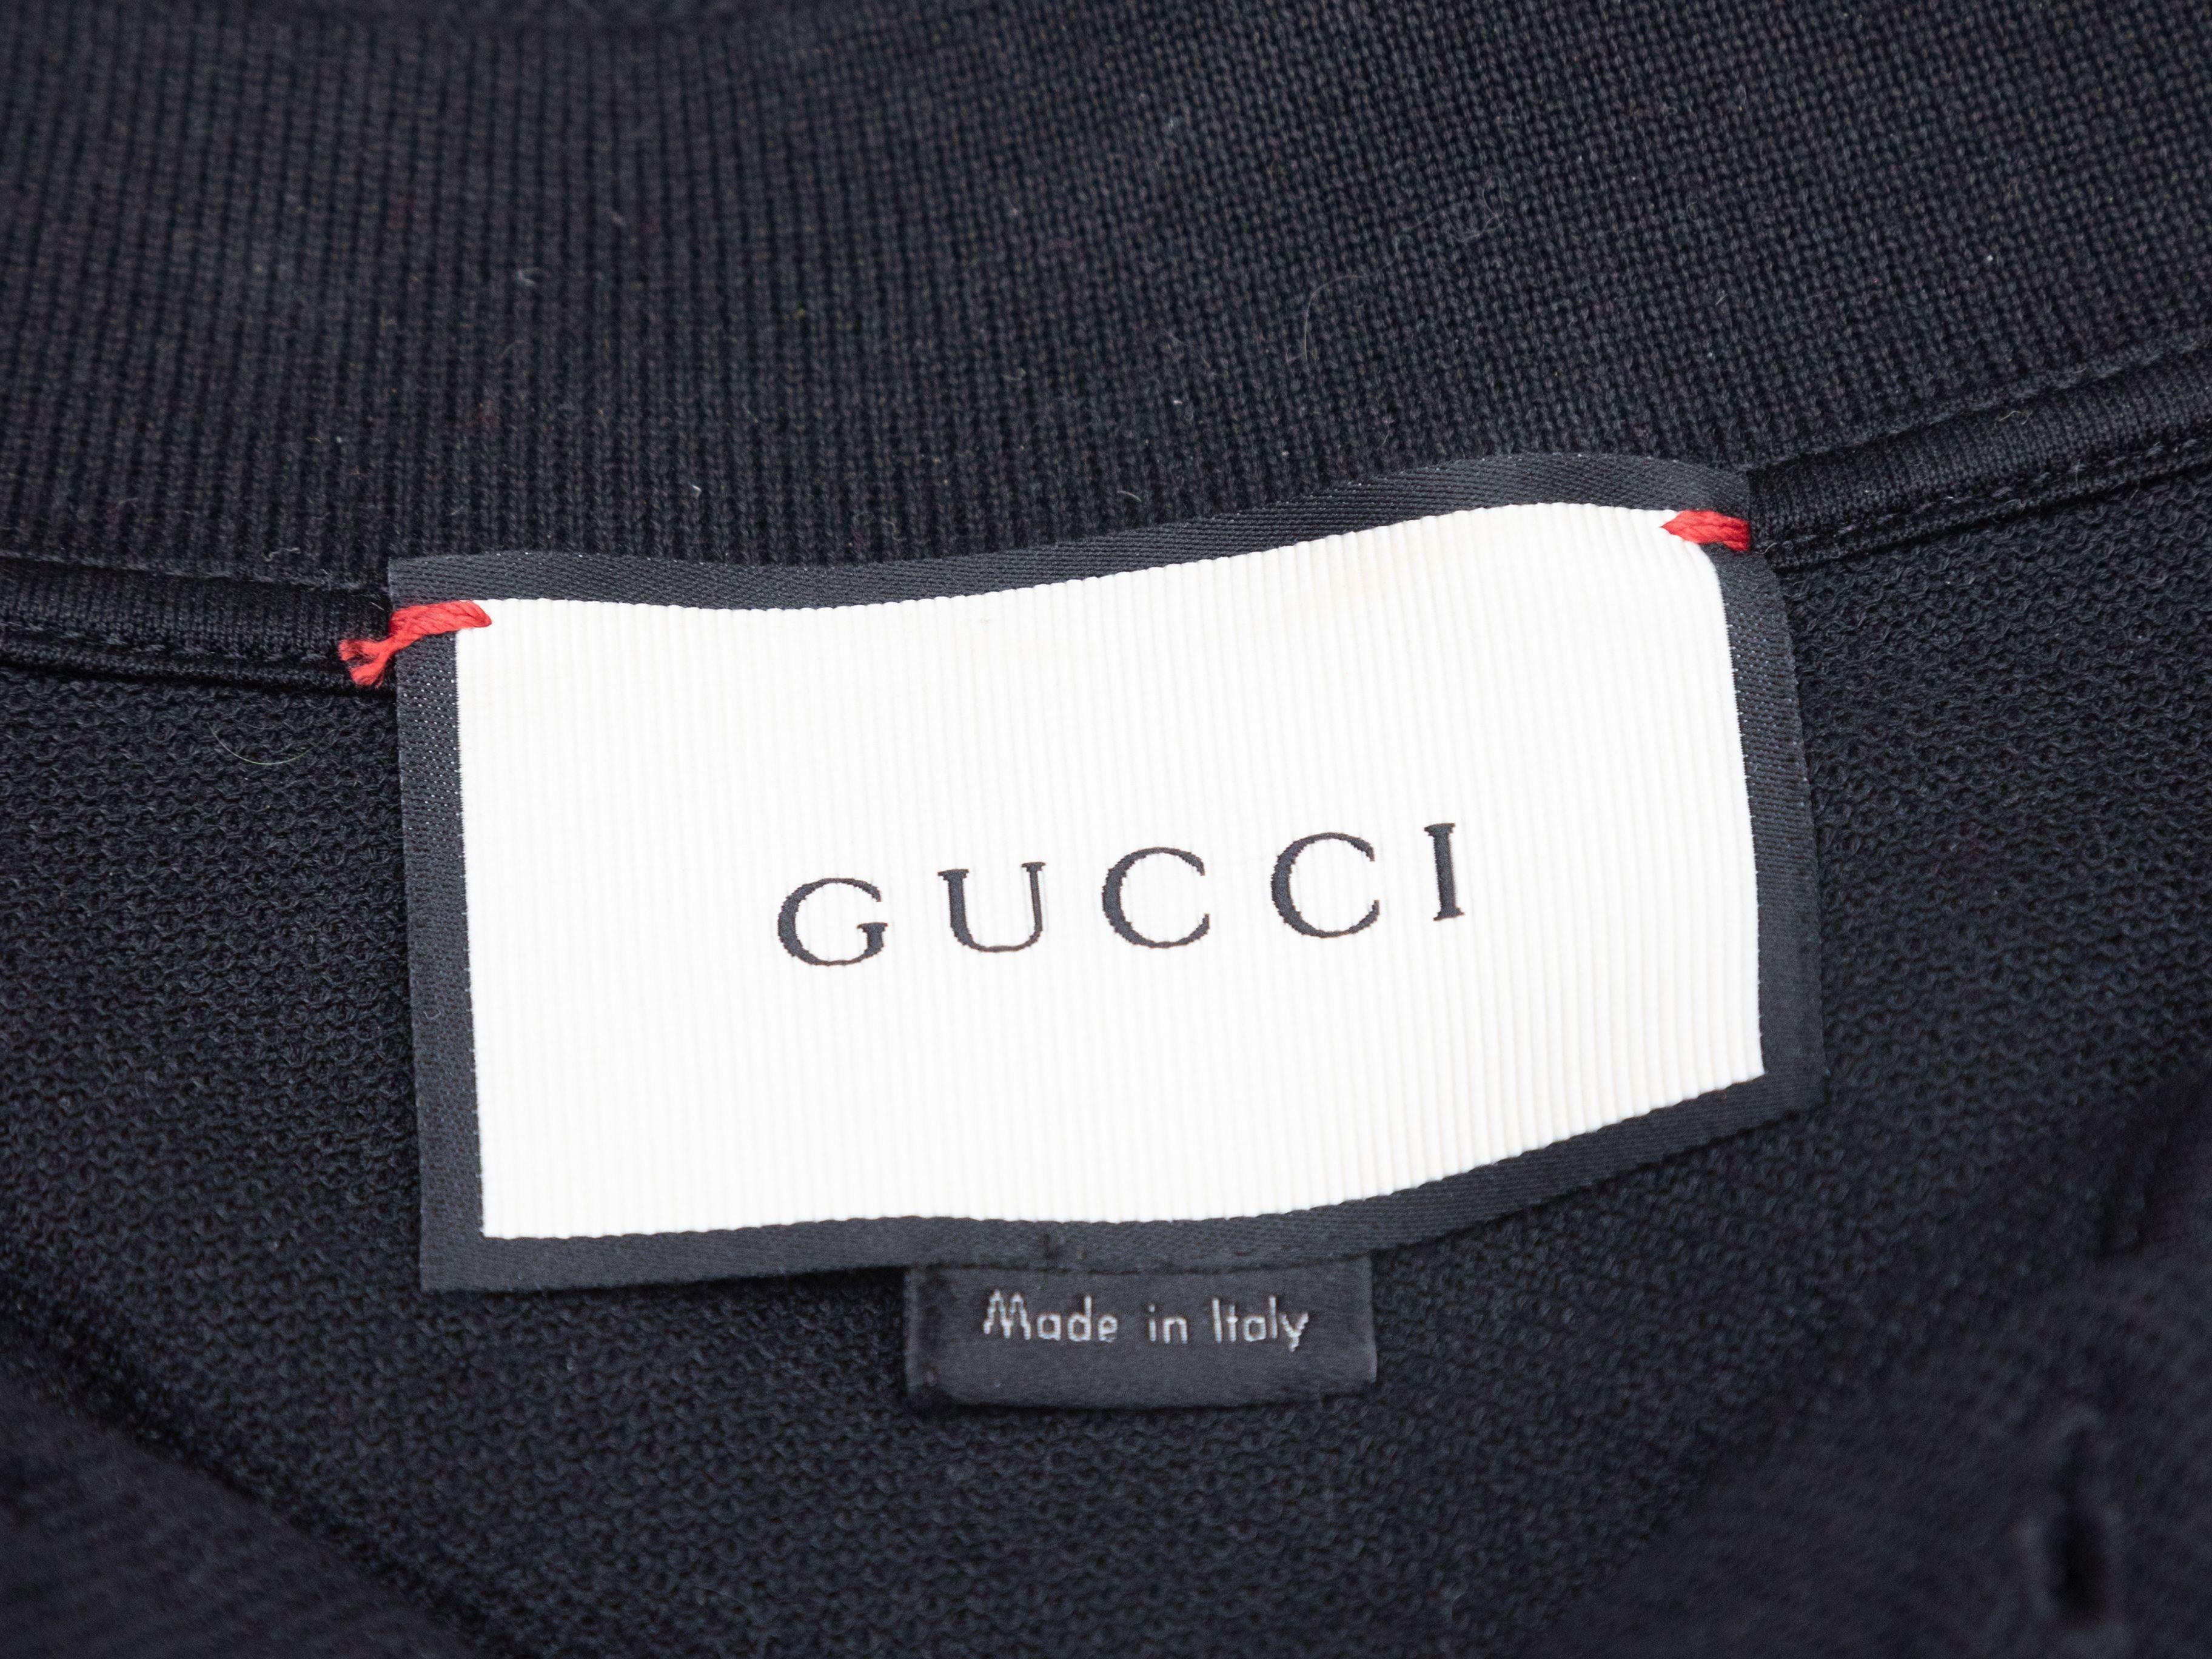 Product Details: Black short sleeve polo shirt by Gucci. Pointed collar. Logo patch at chest. Button closures at chest. 44